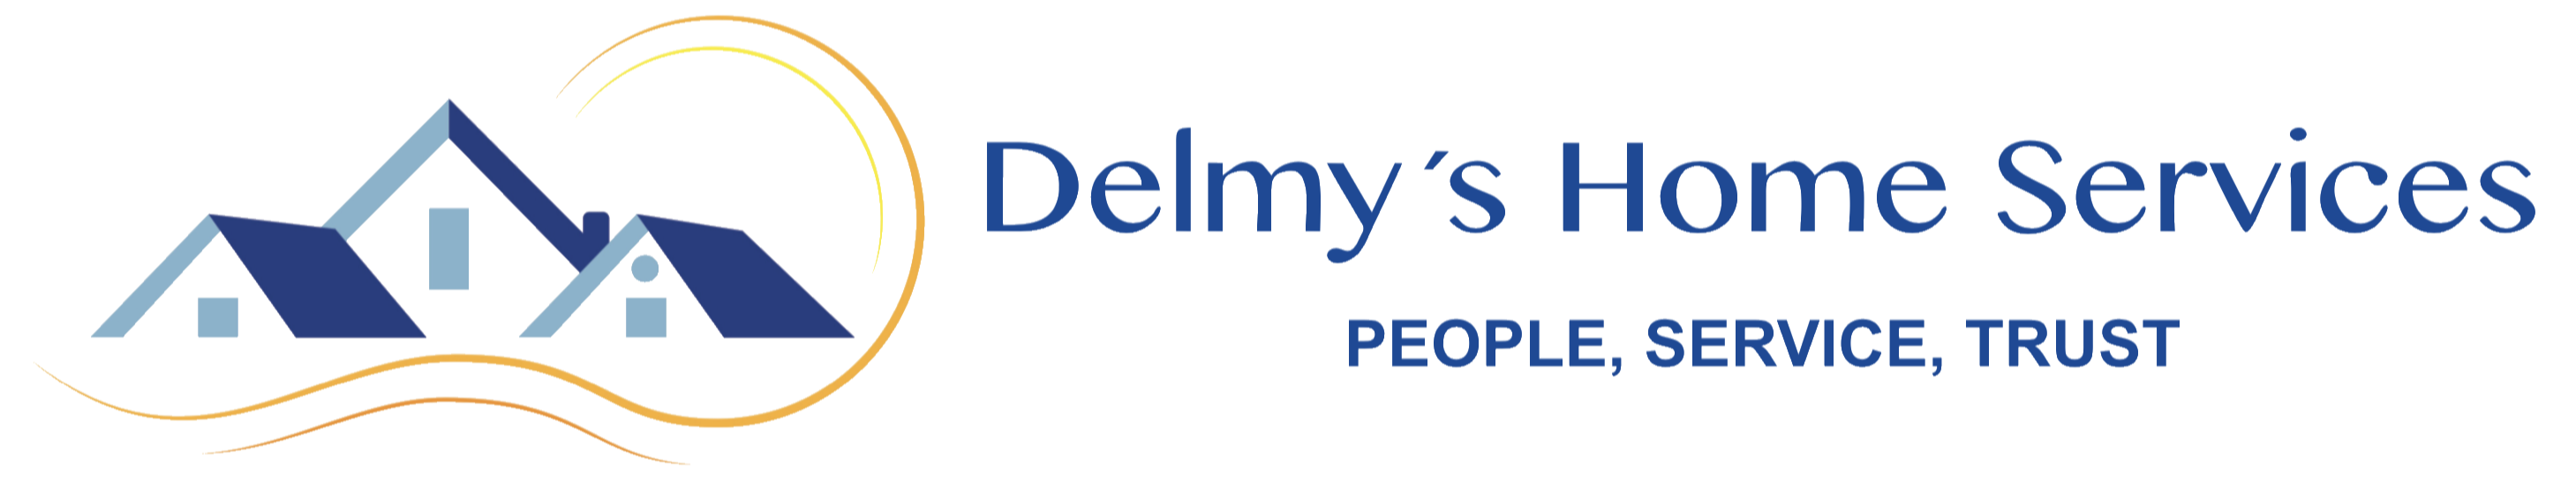 Delmy's Home Services Best House Cleaning in Bonita Springs & Estero Florida